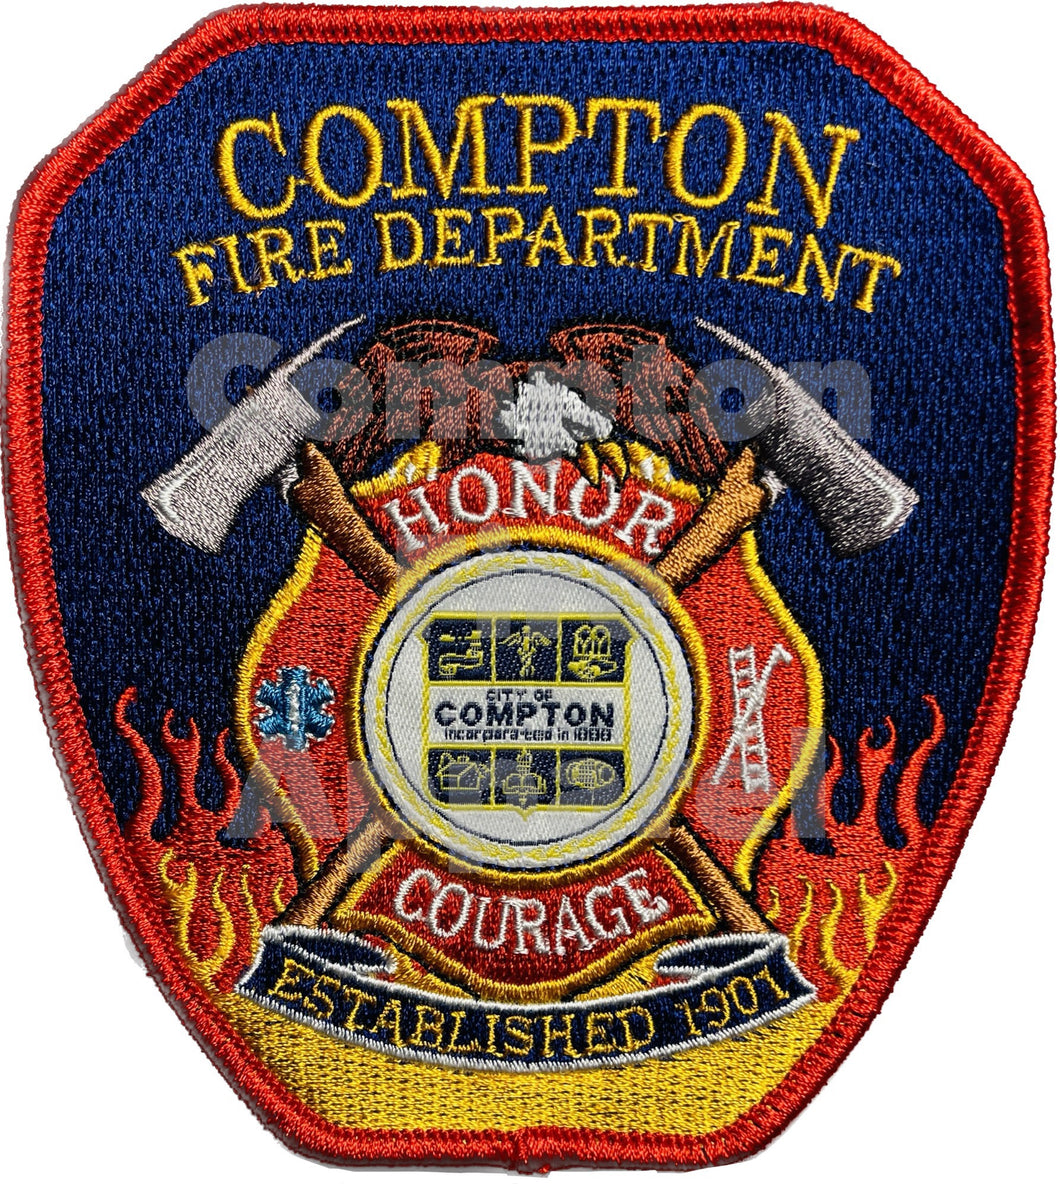 Compton Fire Dept Embroidery Patch (FF & ENG) - Limited Stock!